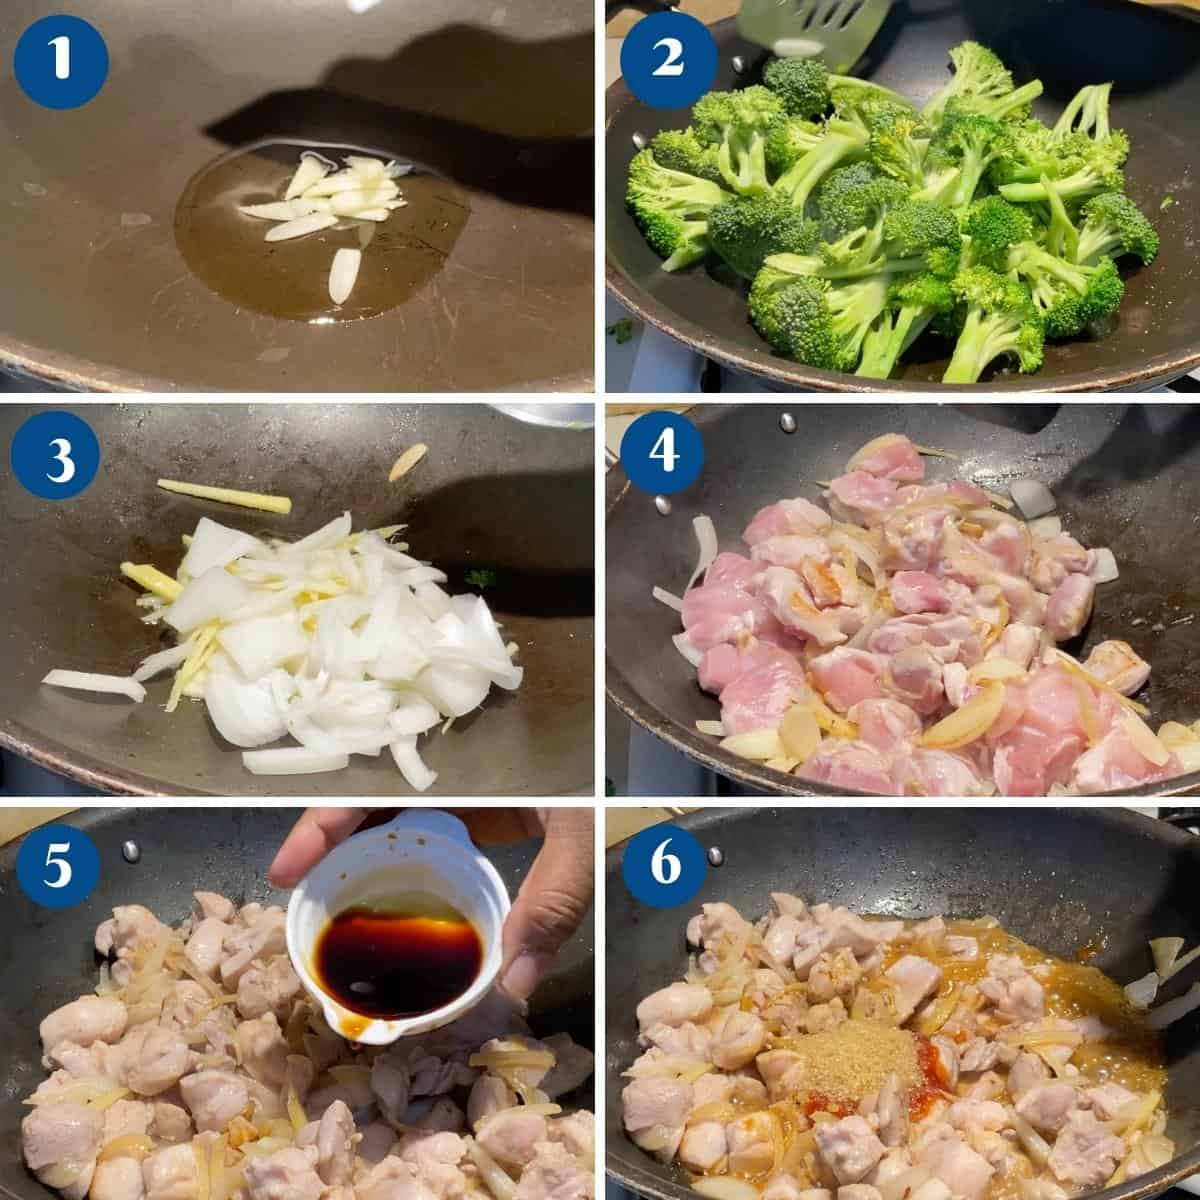 Progress pictures making the stir fry with chicken.